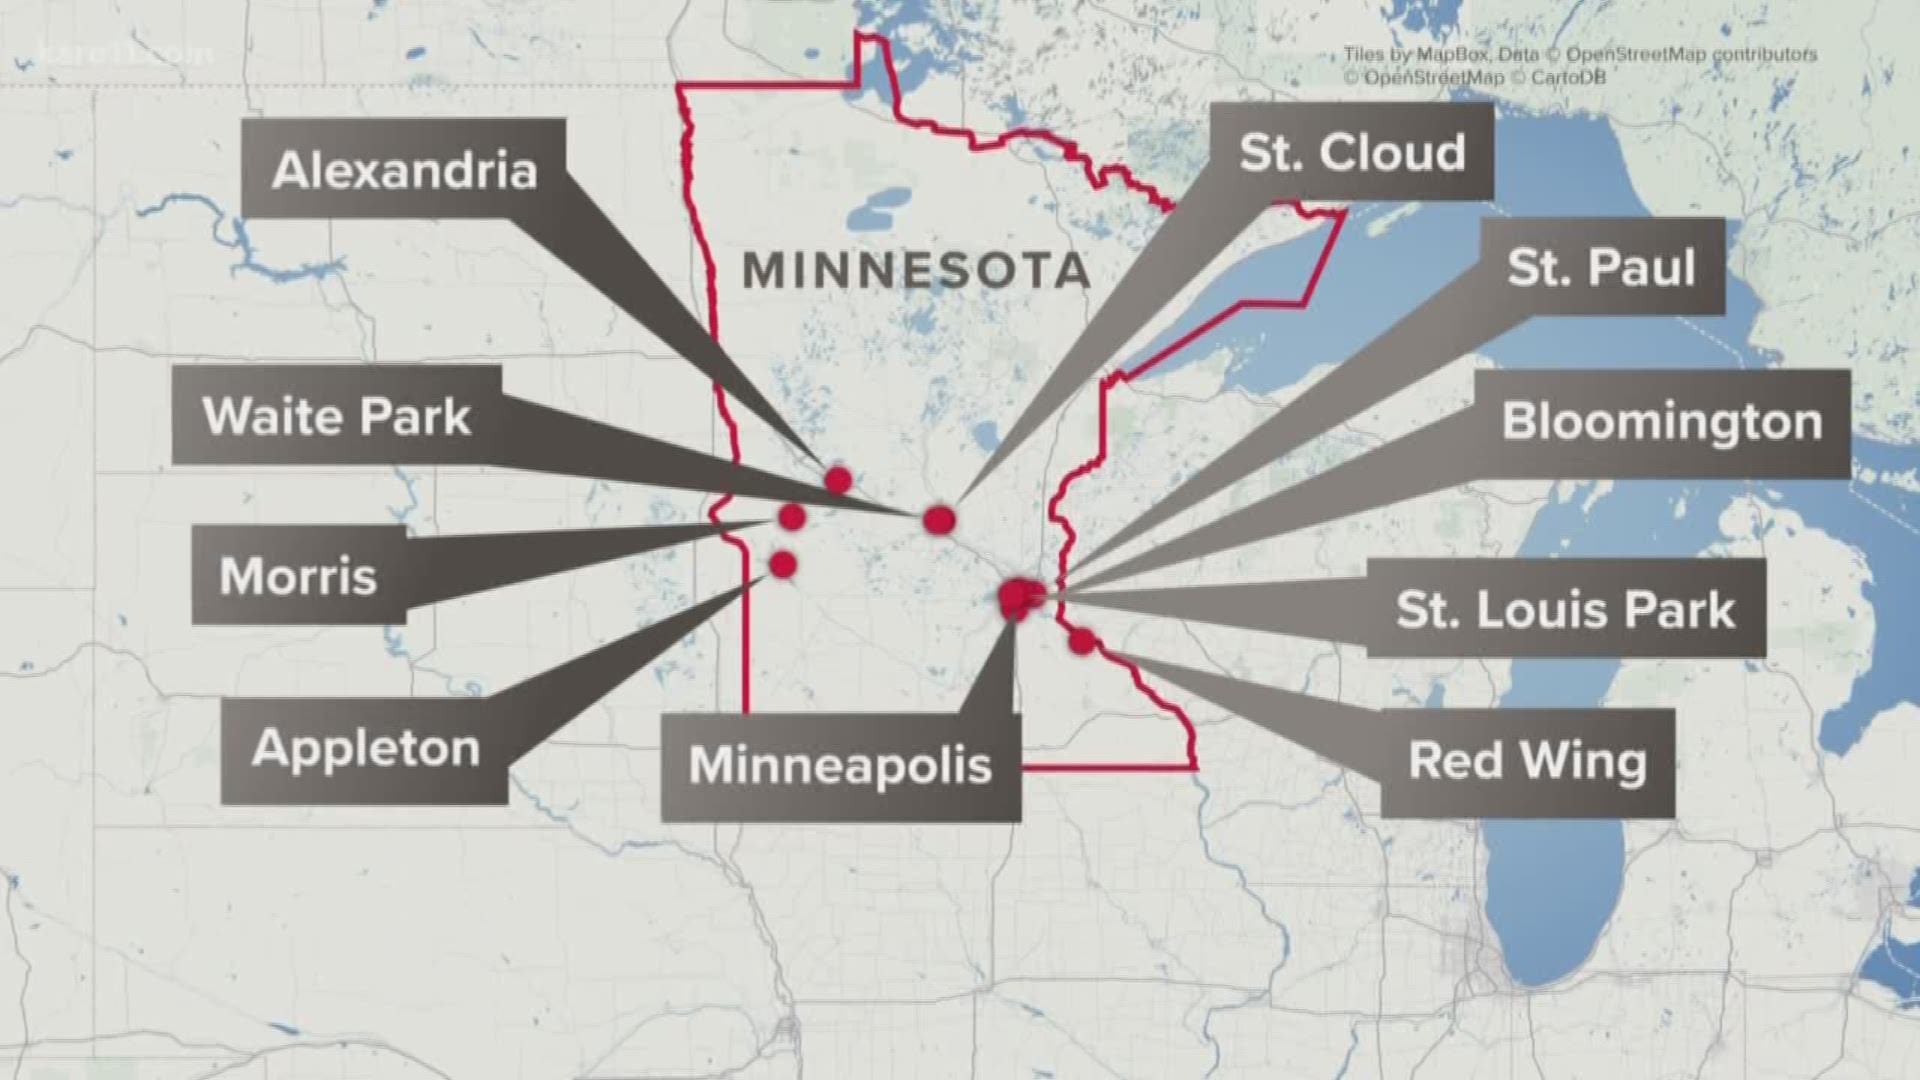 The nationwide wave of bomb threats targeted at least 10 cities in Minnesota.